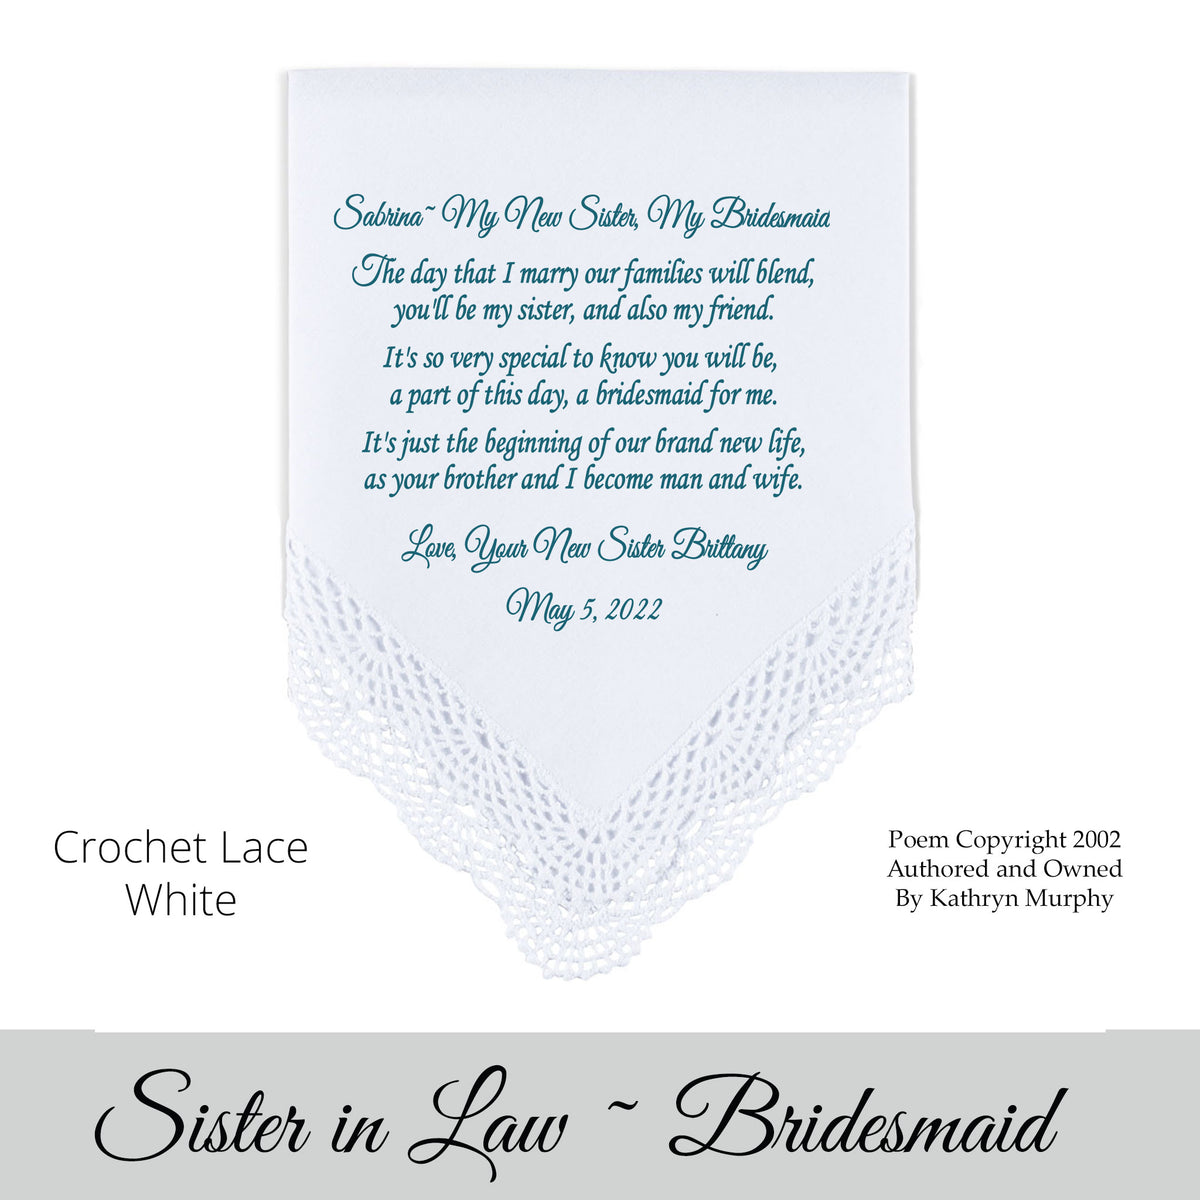 Gift for the sister in law bridesmaid poem printed wedding hankie